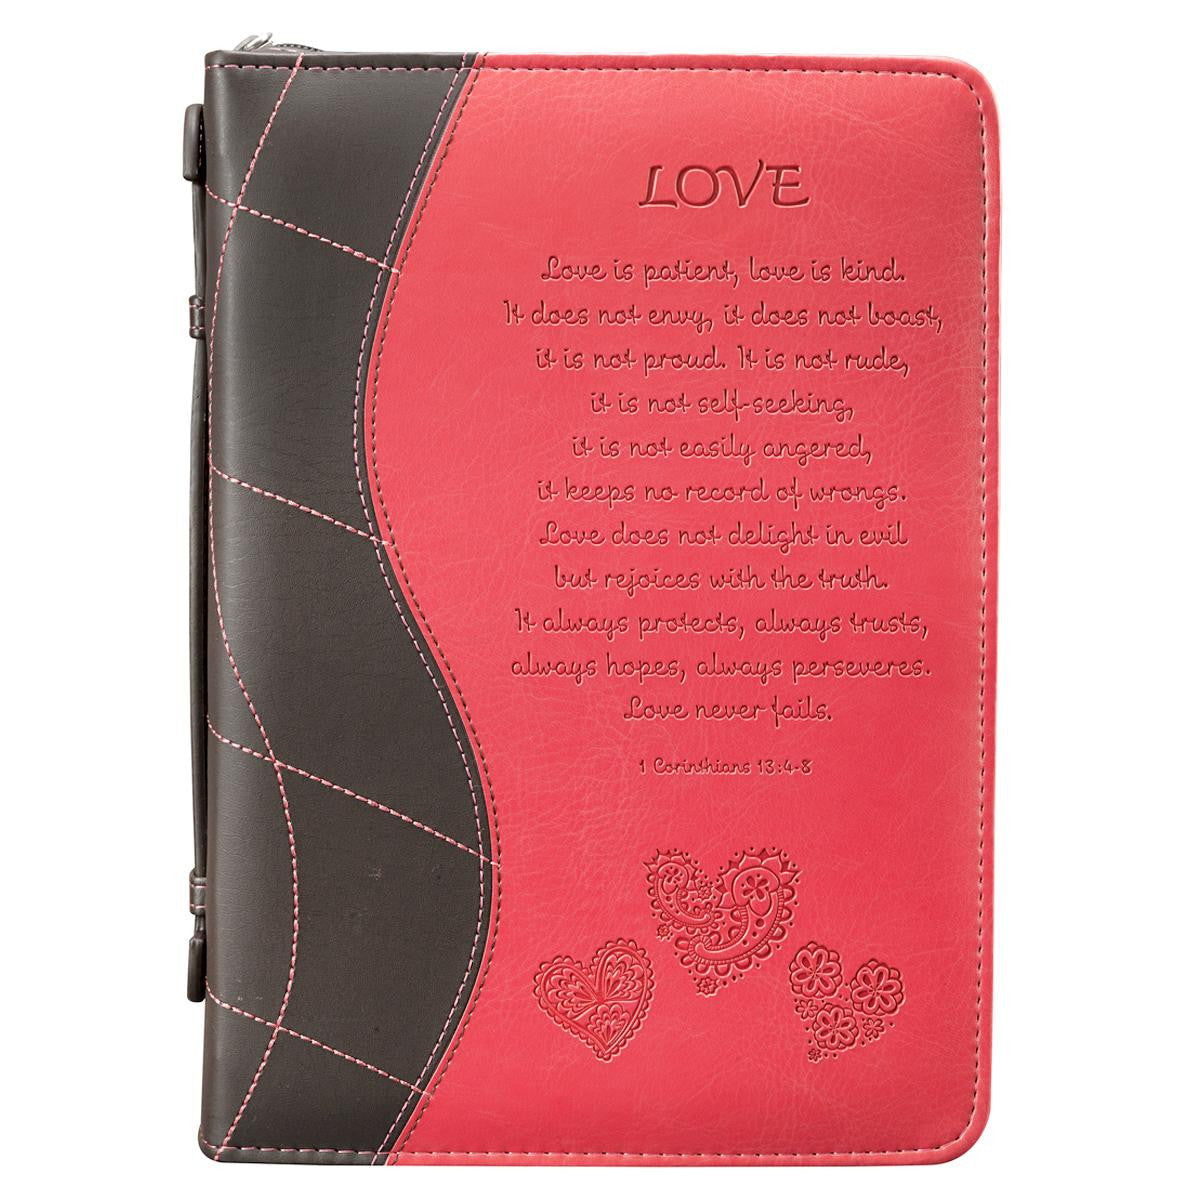 1 Corinthians 13:4-8 Fabric Large Pink/Brown Bible Cover Religious Articles Christian Art Gifts Inc - St. Cloud Book Shop